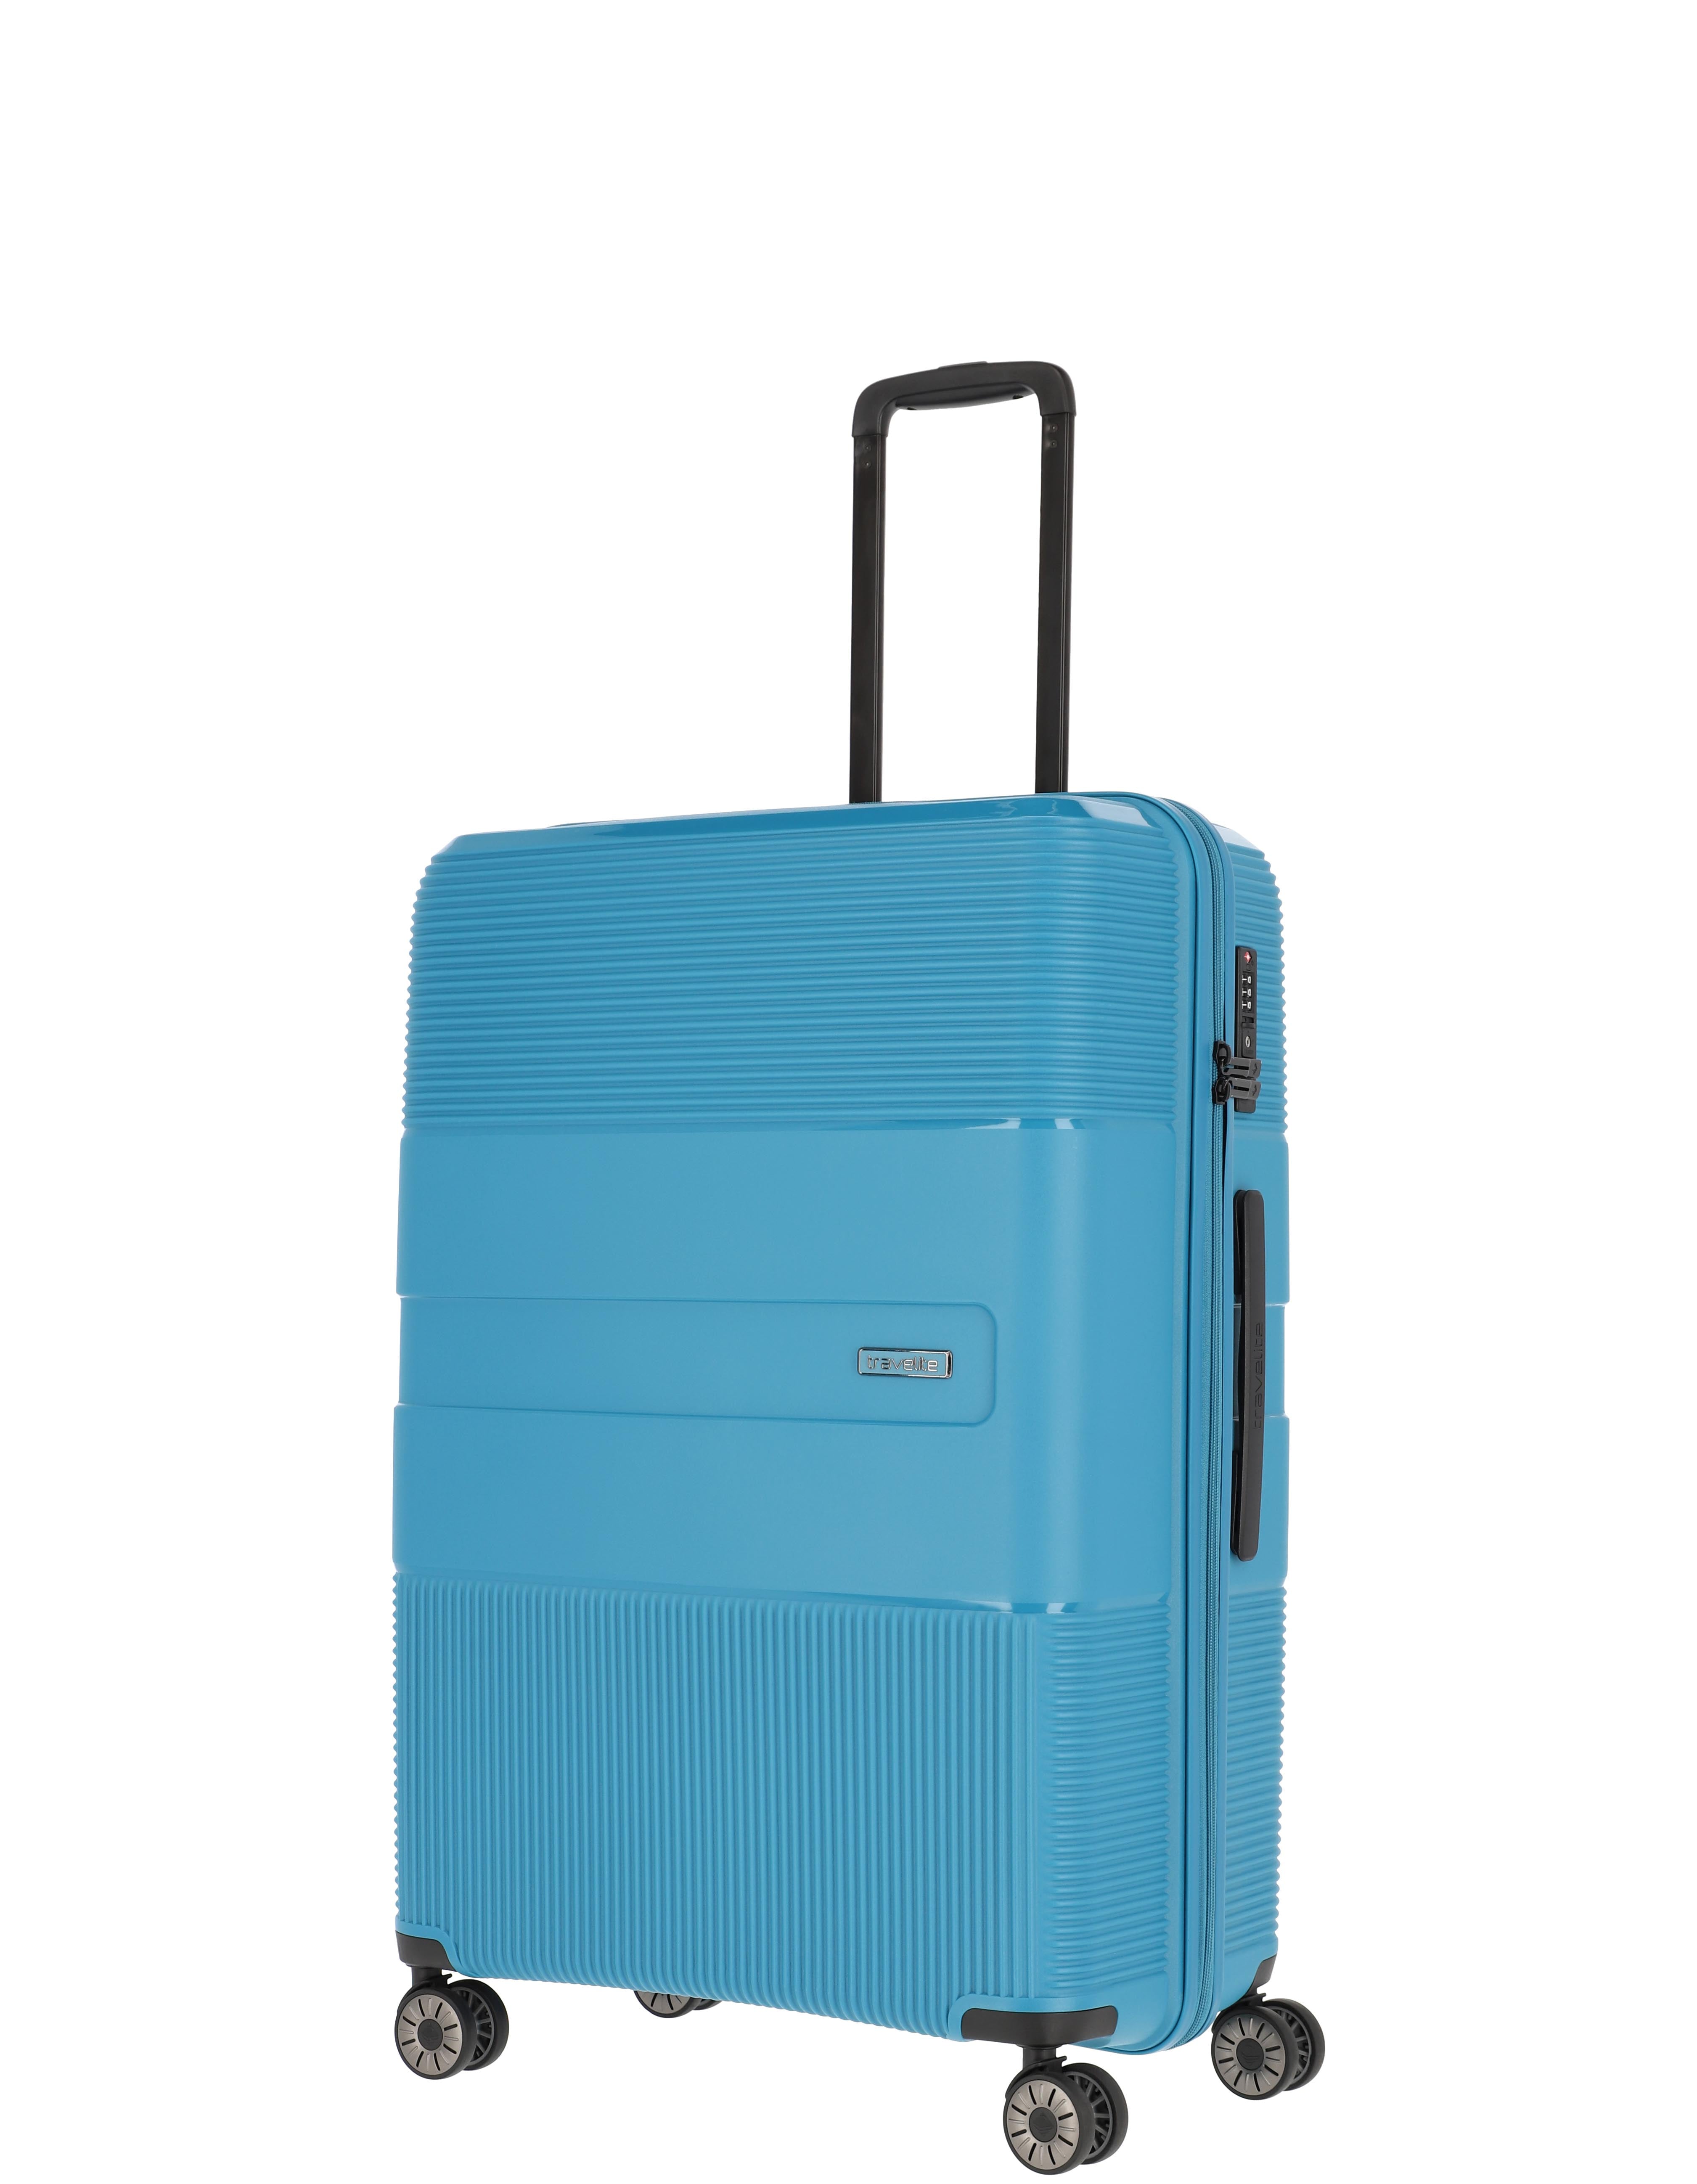 Waal Trolley L turquoise